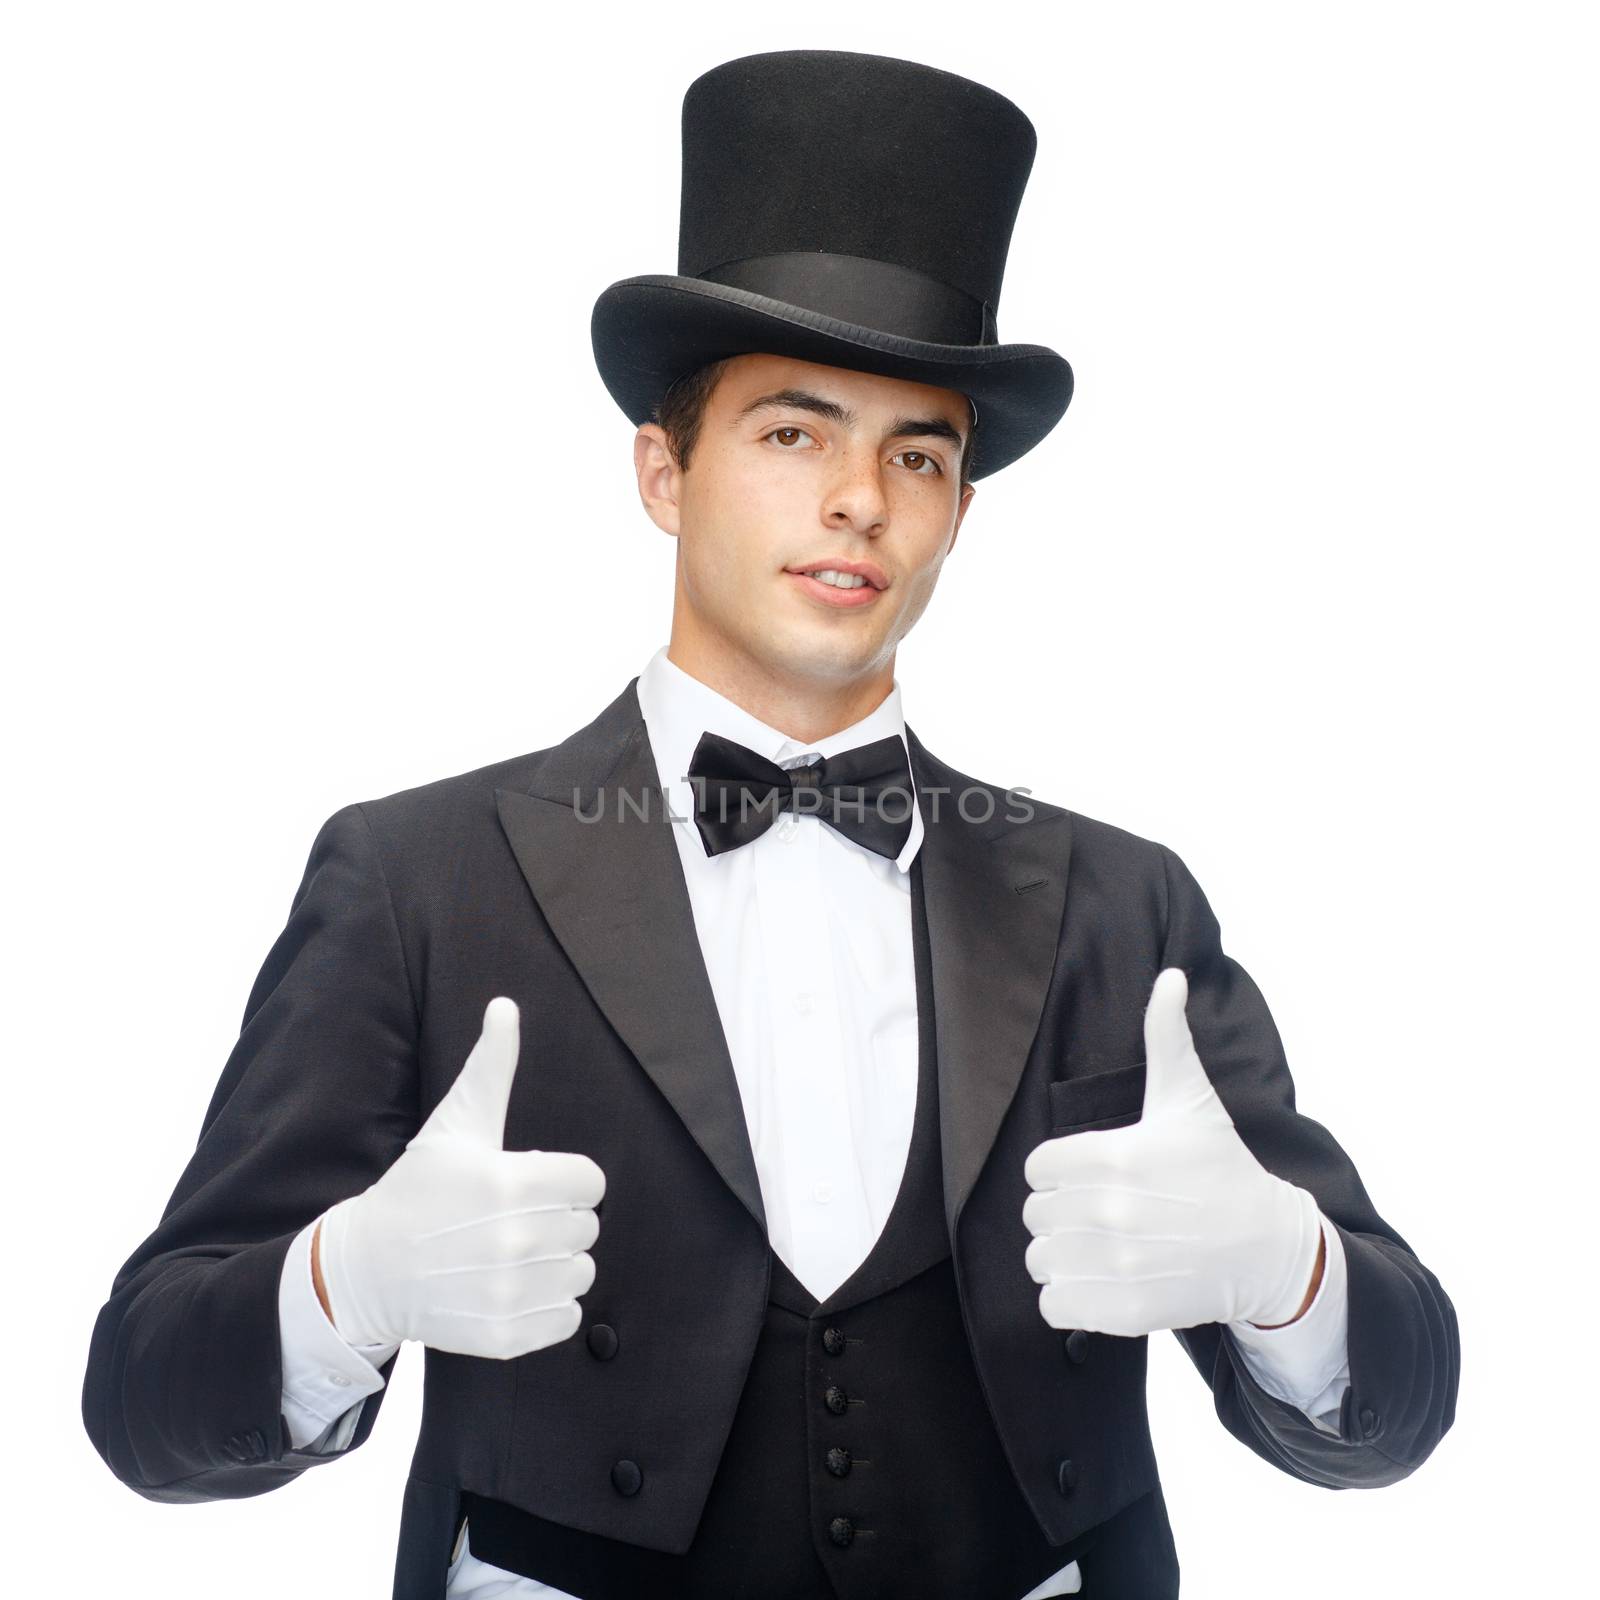 magician in top hat showing thumbs up by dolgachov